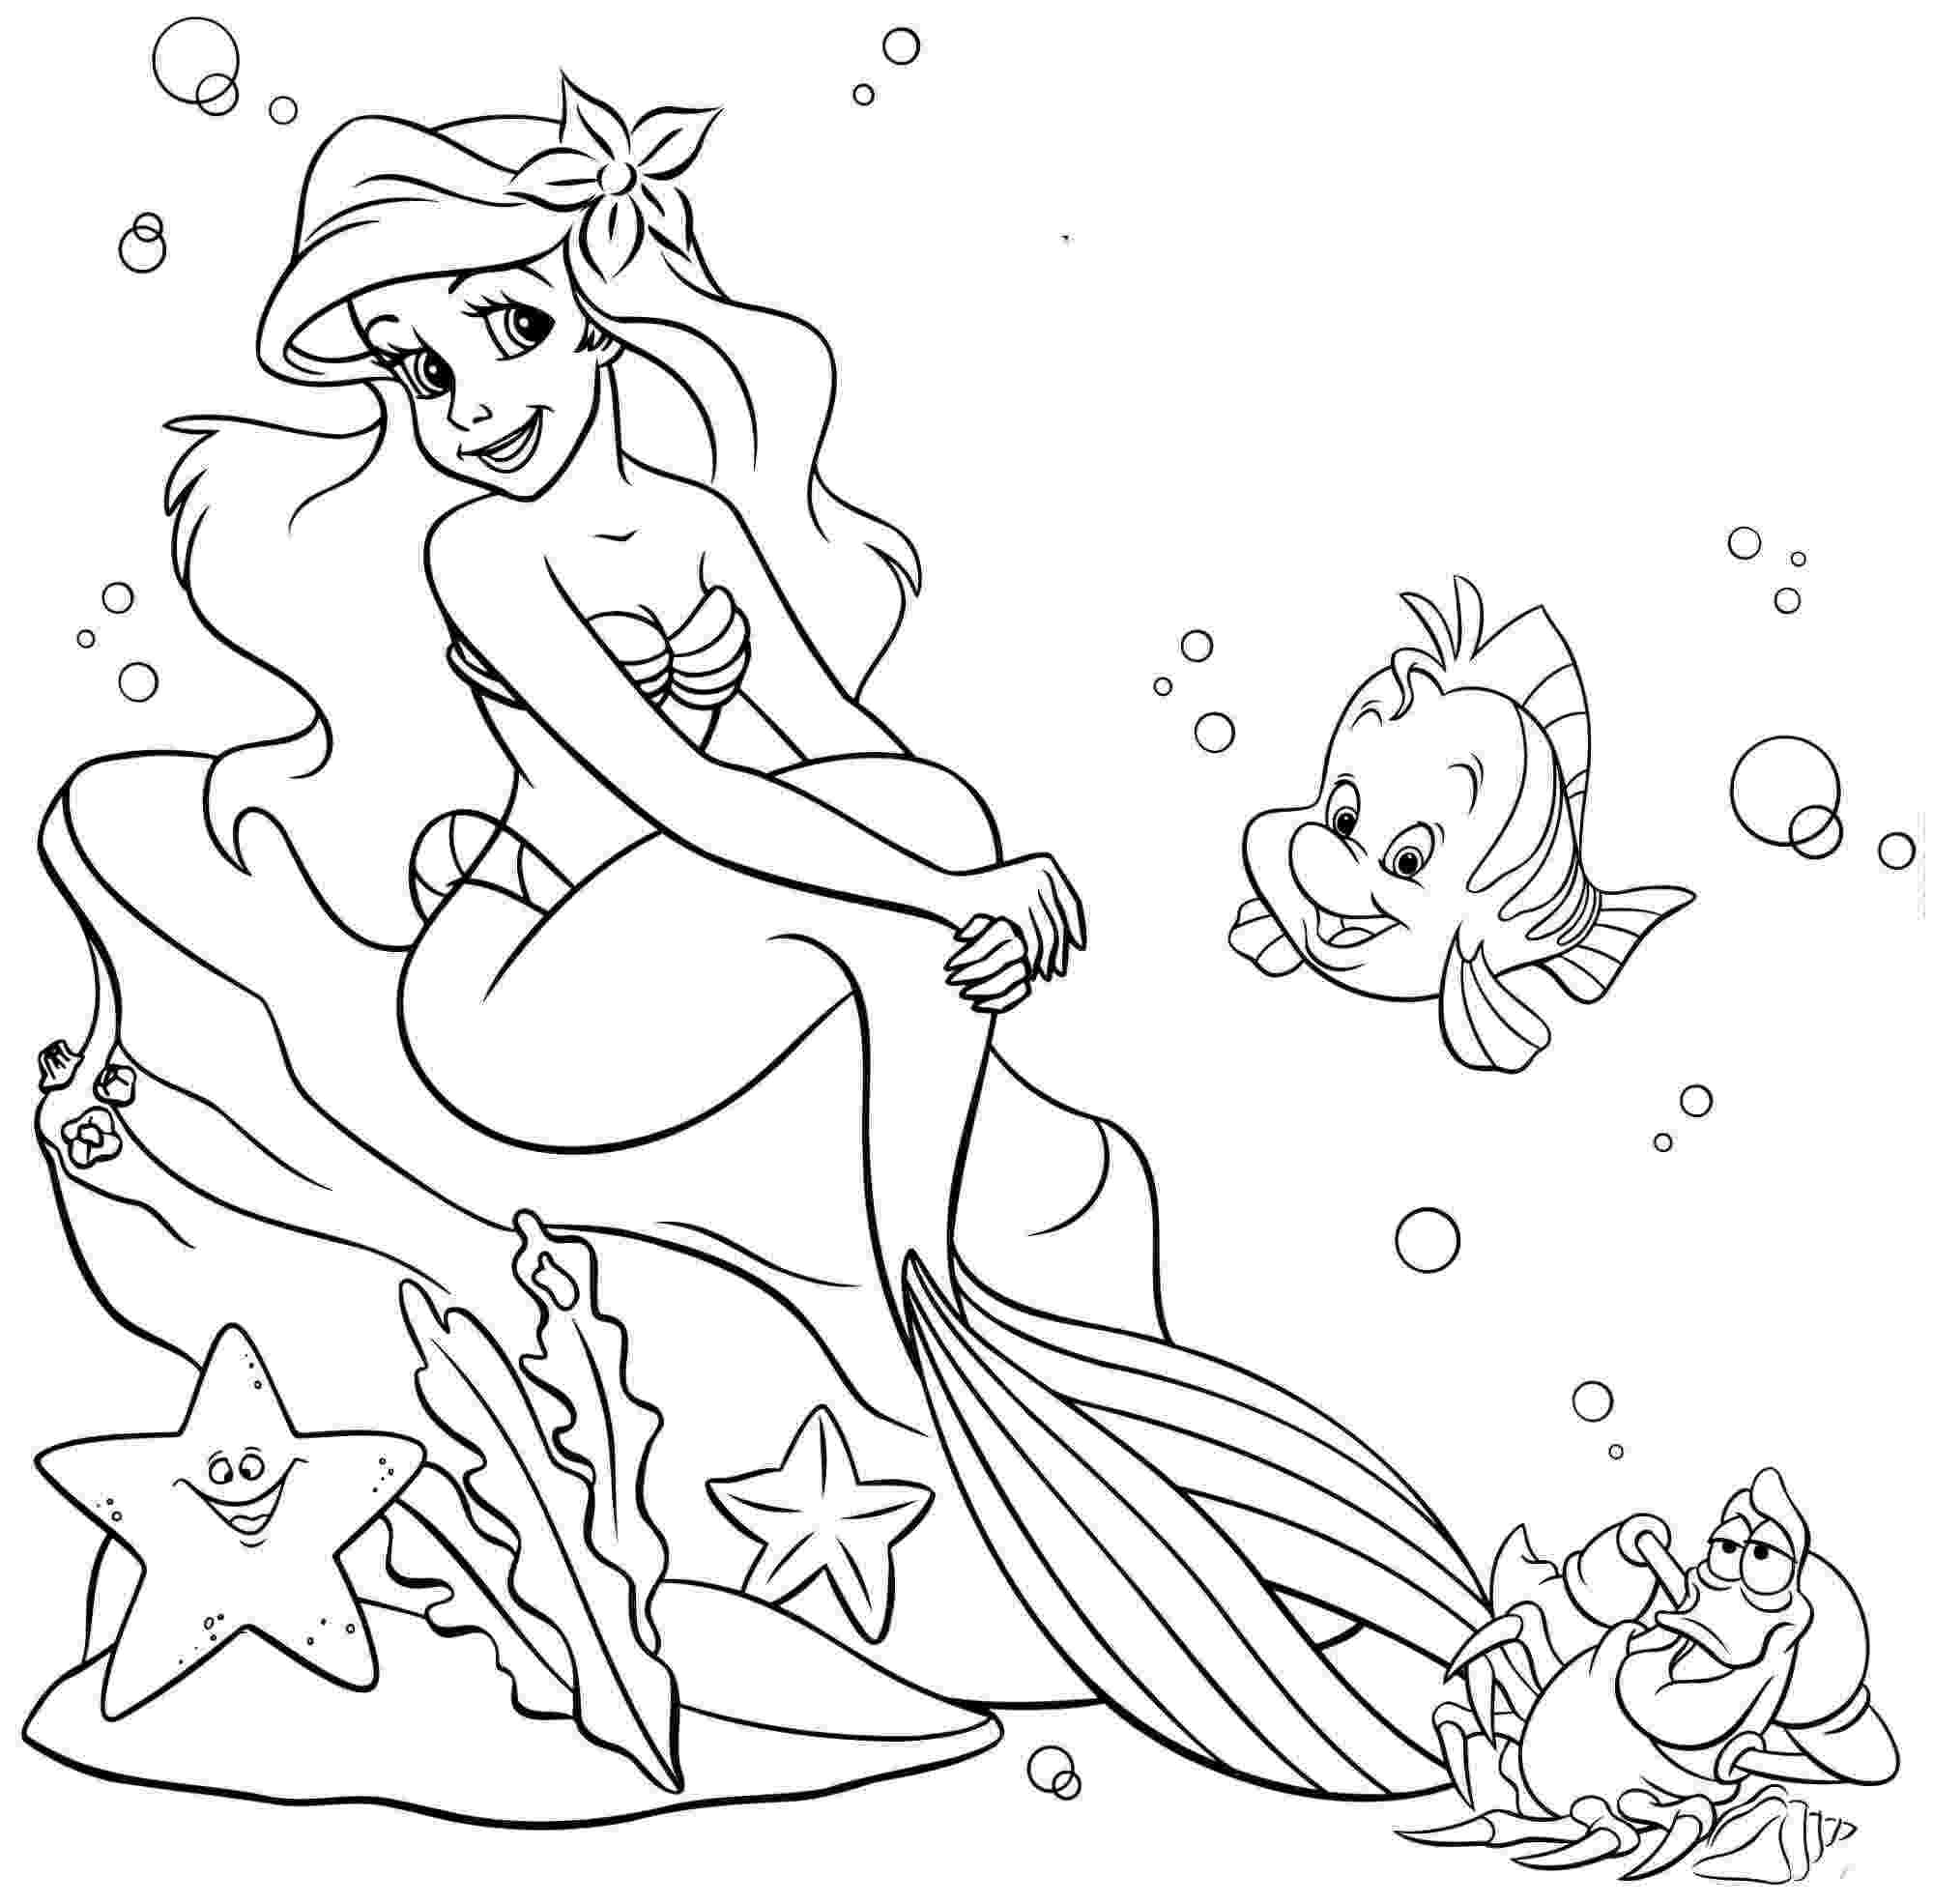 ariel picture to color free coloring pages ariel coloring pages ariel picture to color 